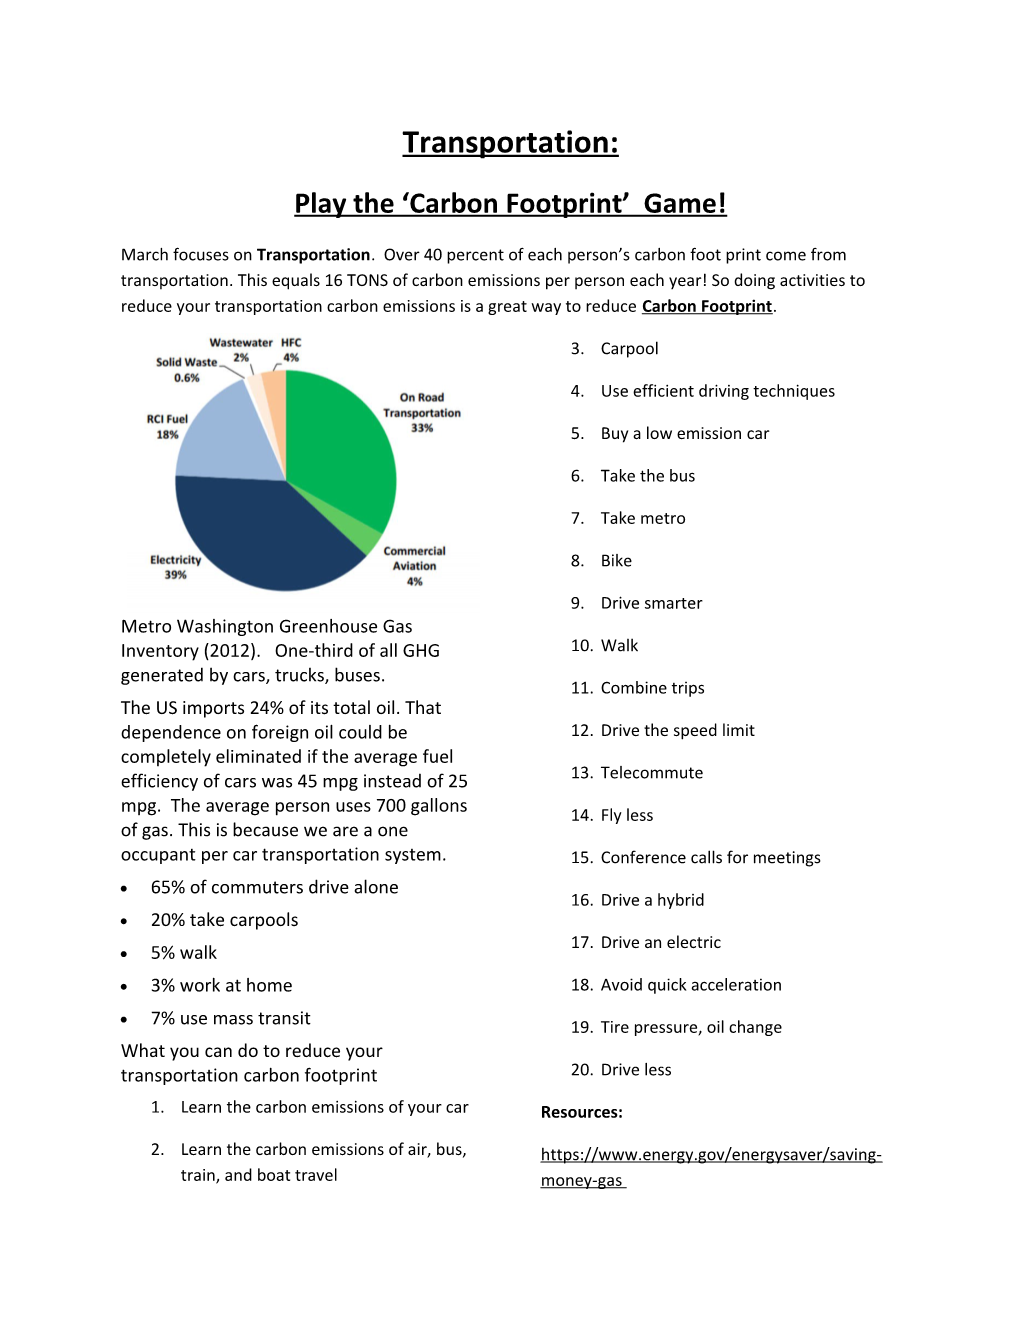 Play the Carbon Footprint Game!